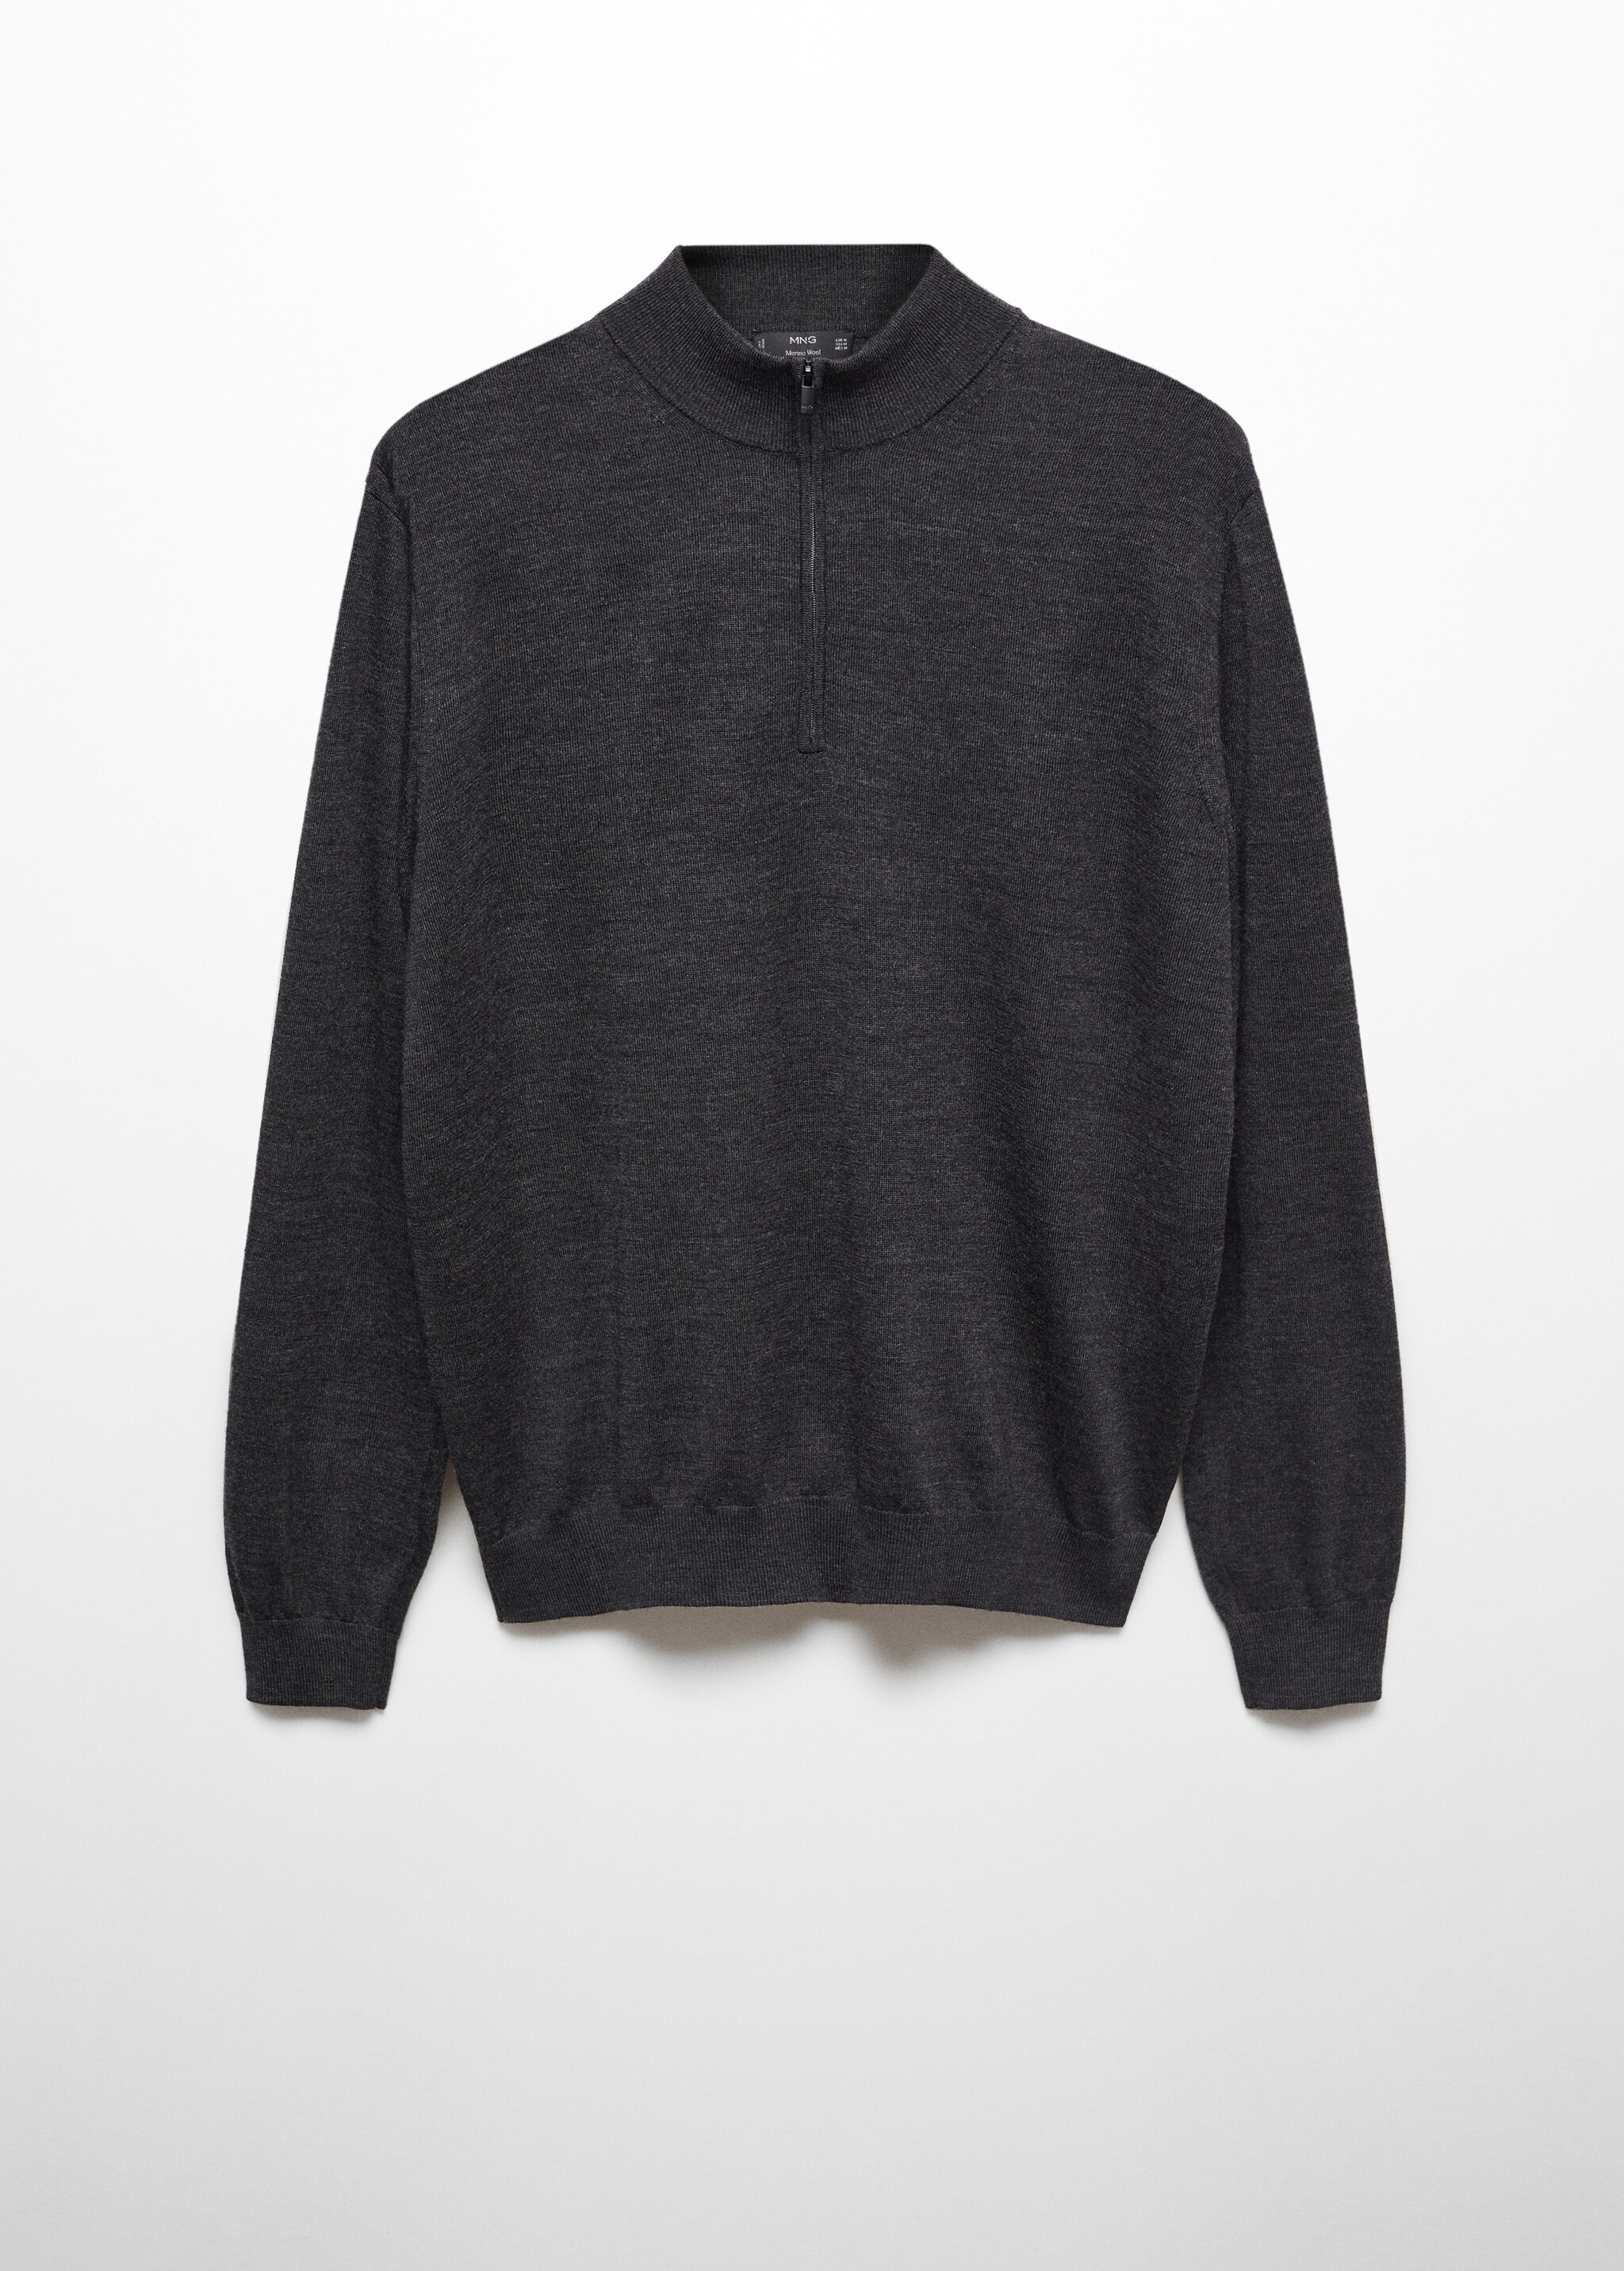 100% merino wool sweater with zip collar - Article without model